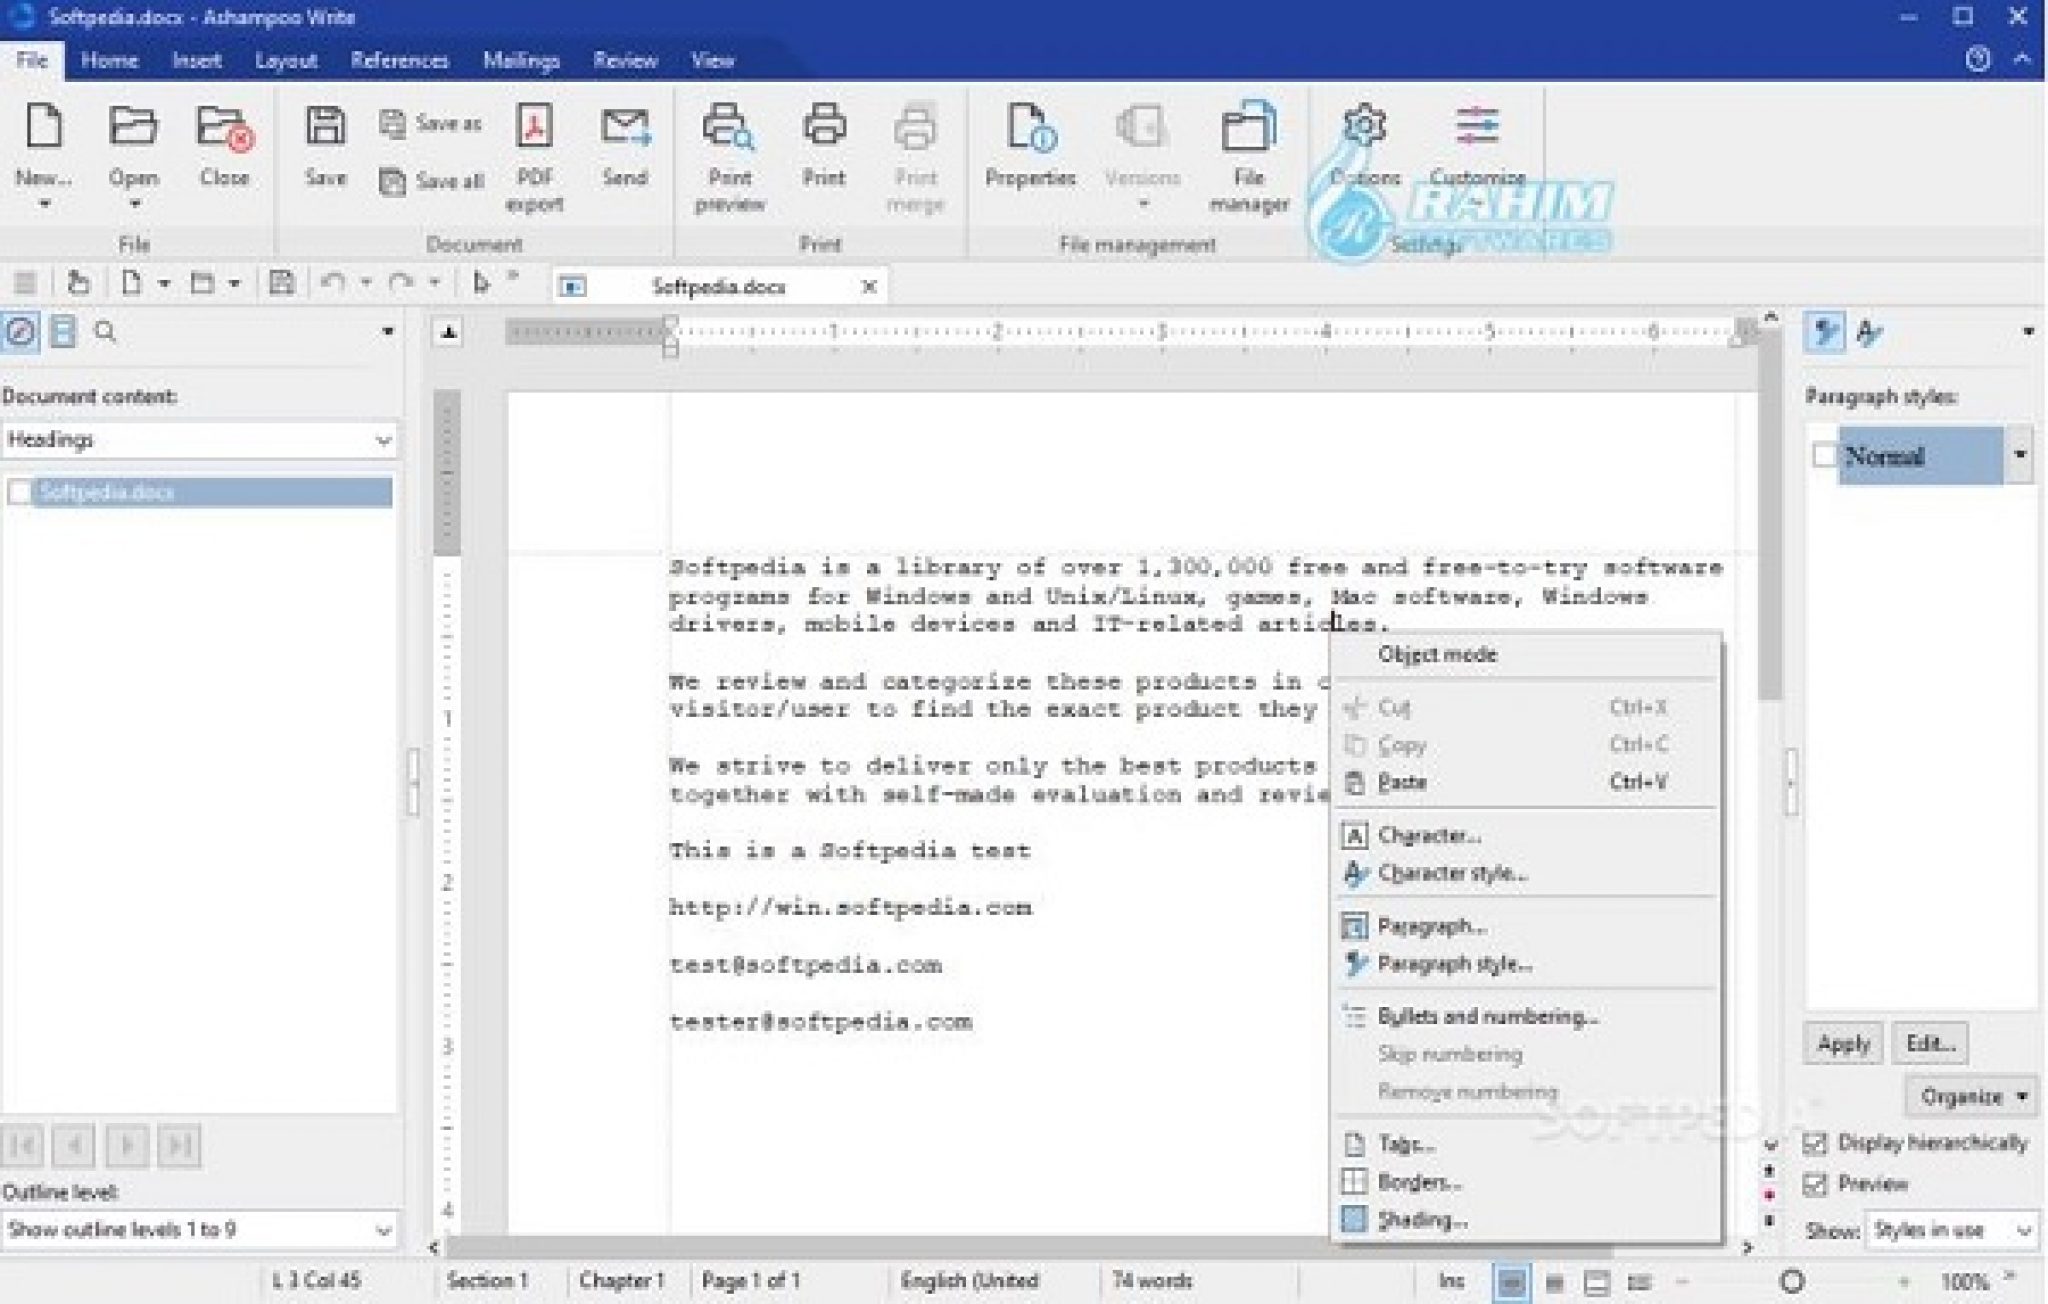 Ashampoo Office 9 Rev A1203.0831 for mac download free